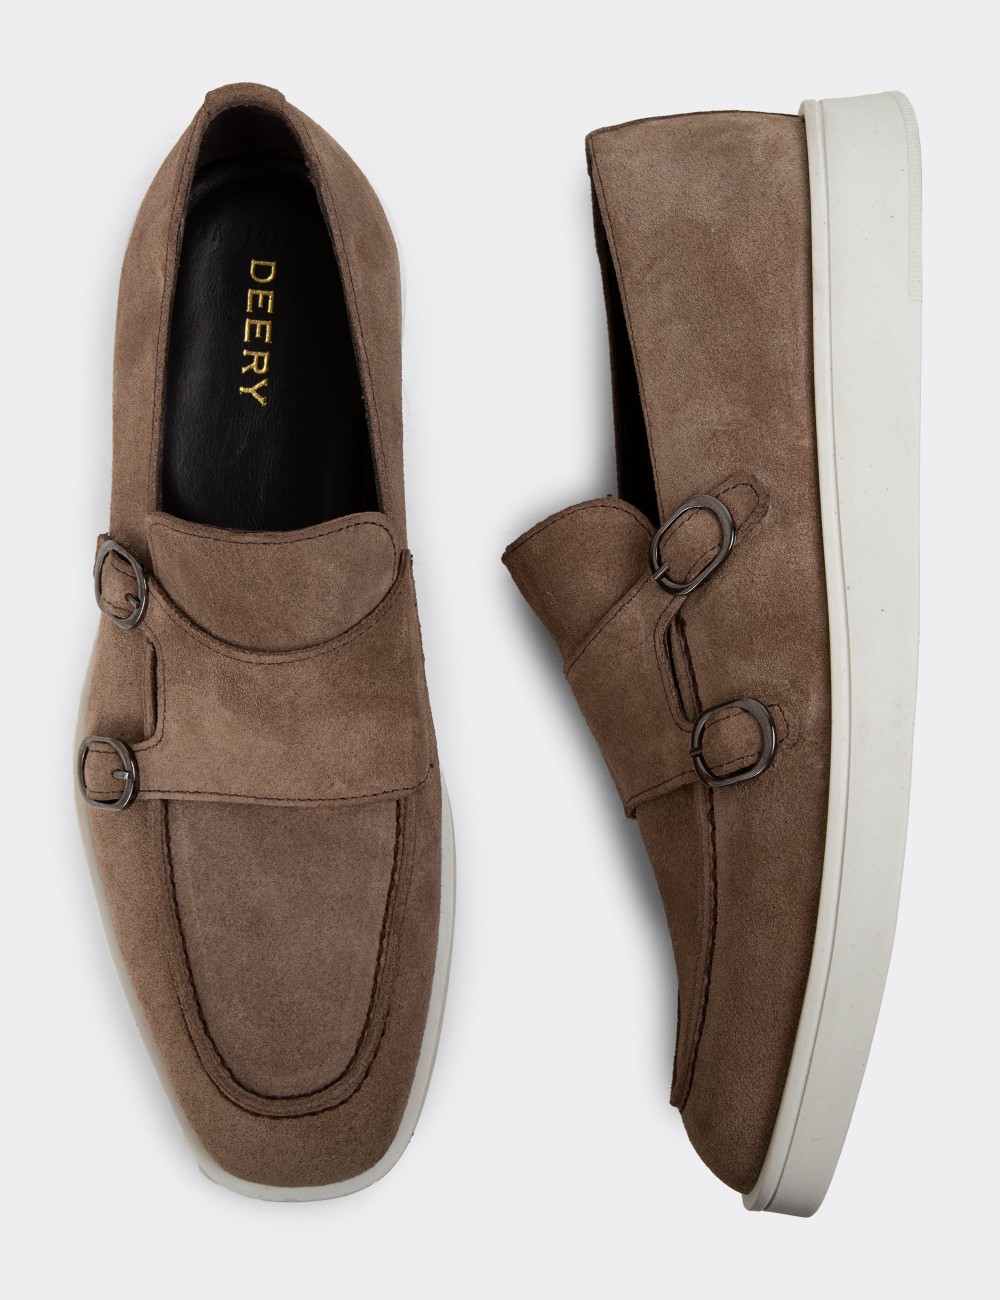 Sandstone Suede Leather Loafers - 01966MVZNC01